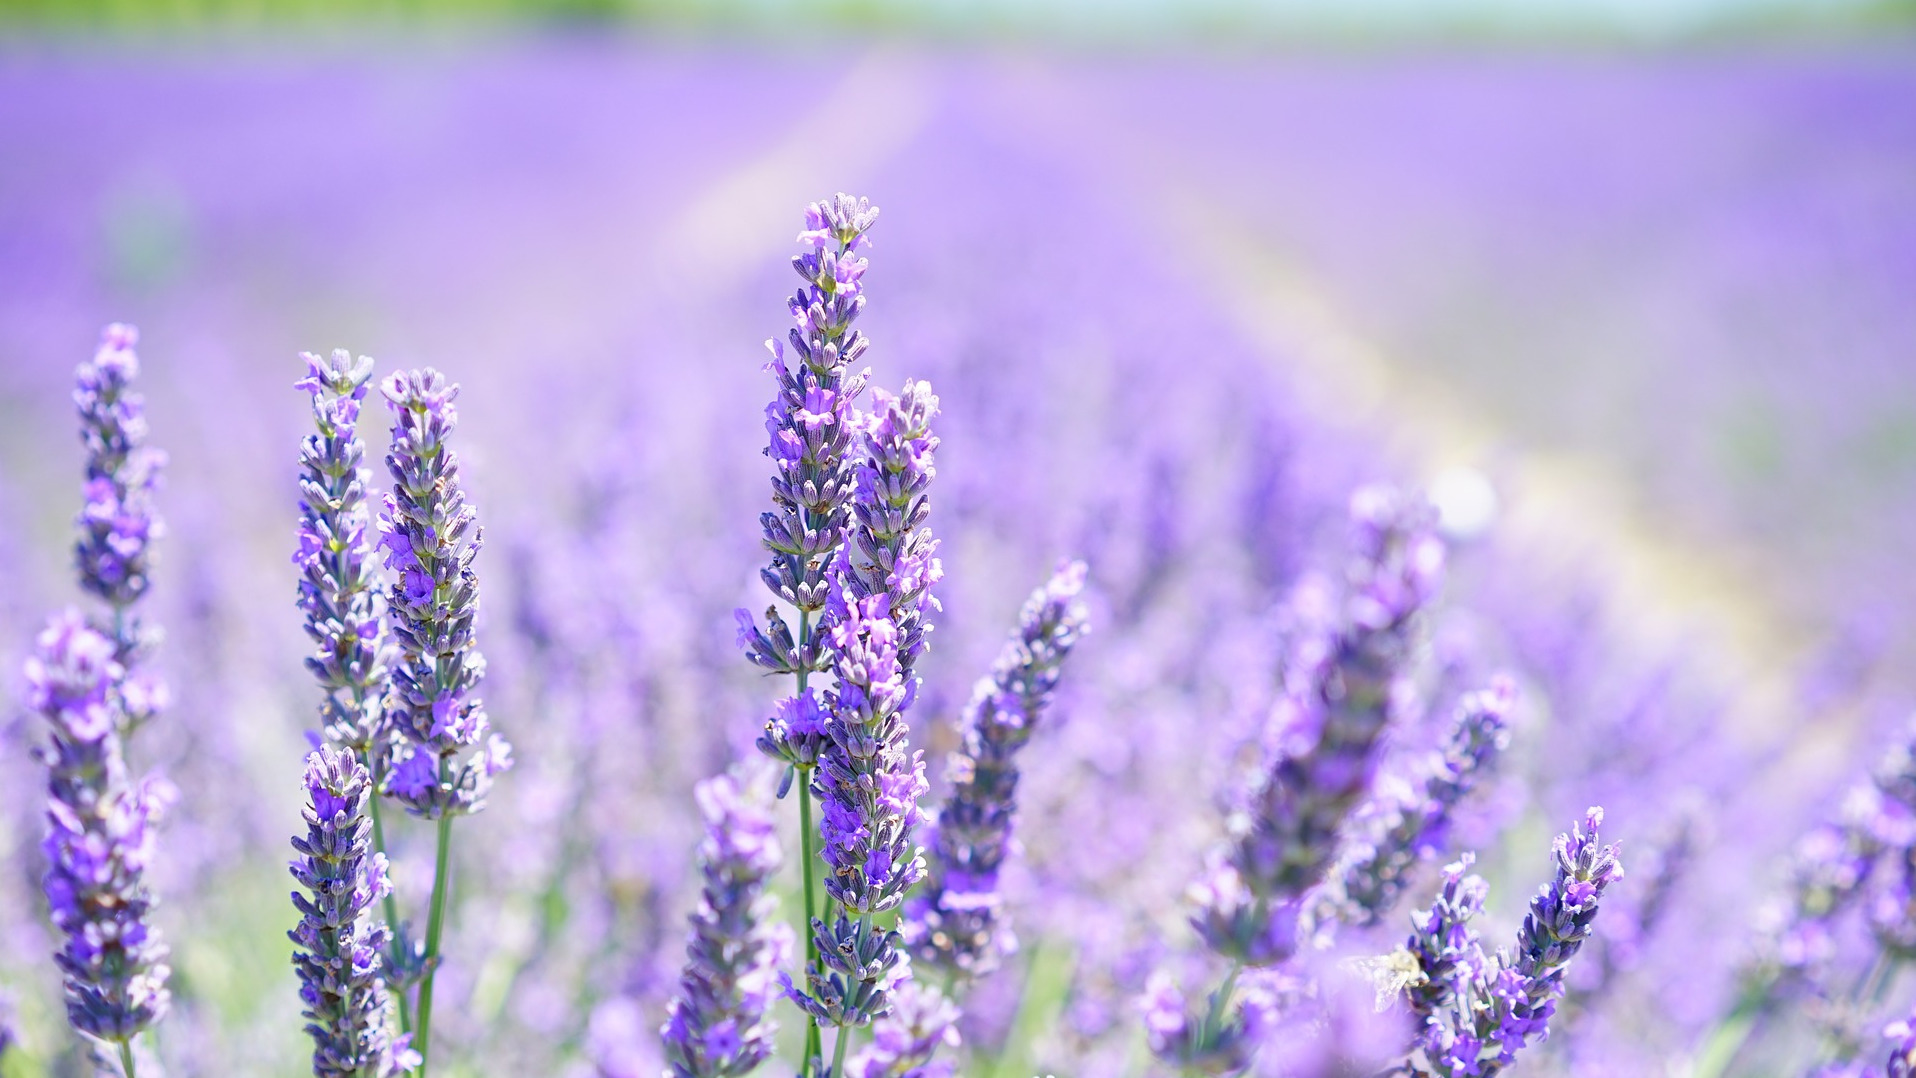 Field of Lavender Flowers used to make Lavender Essential Oil